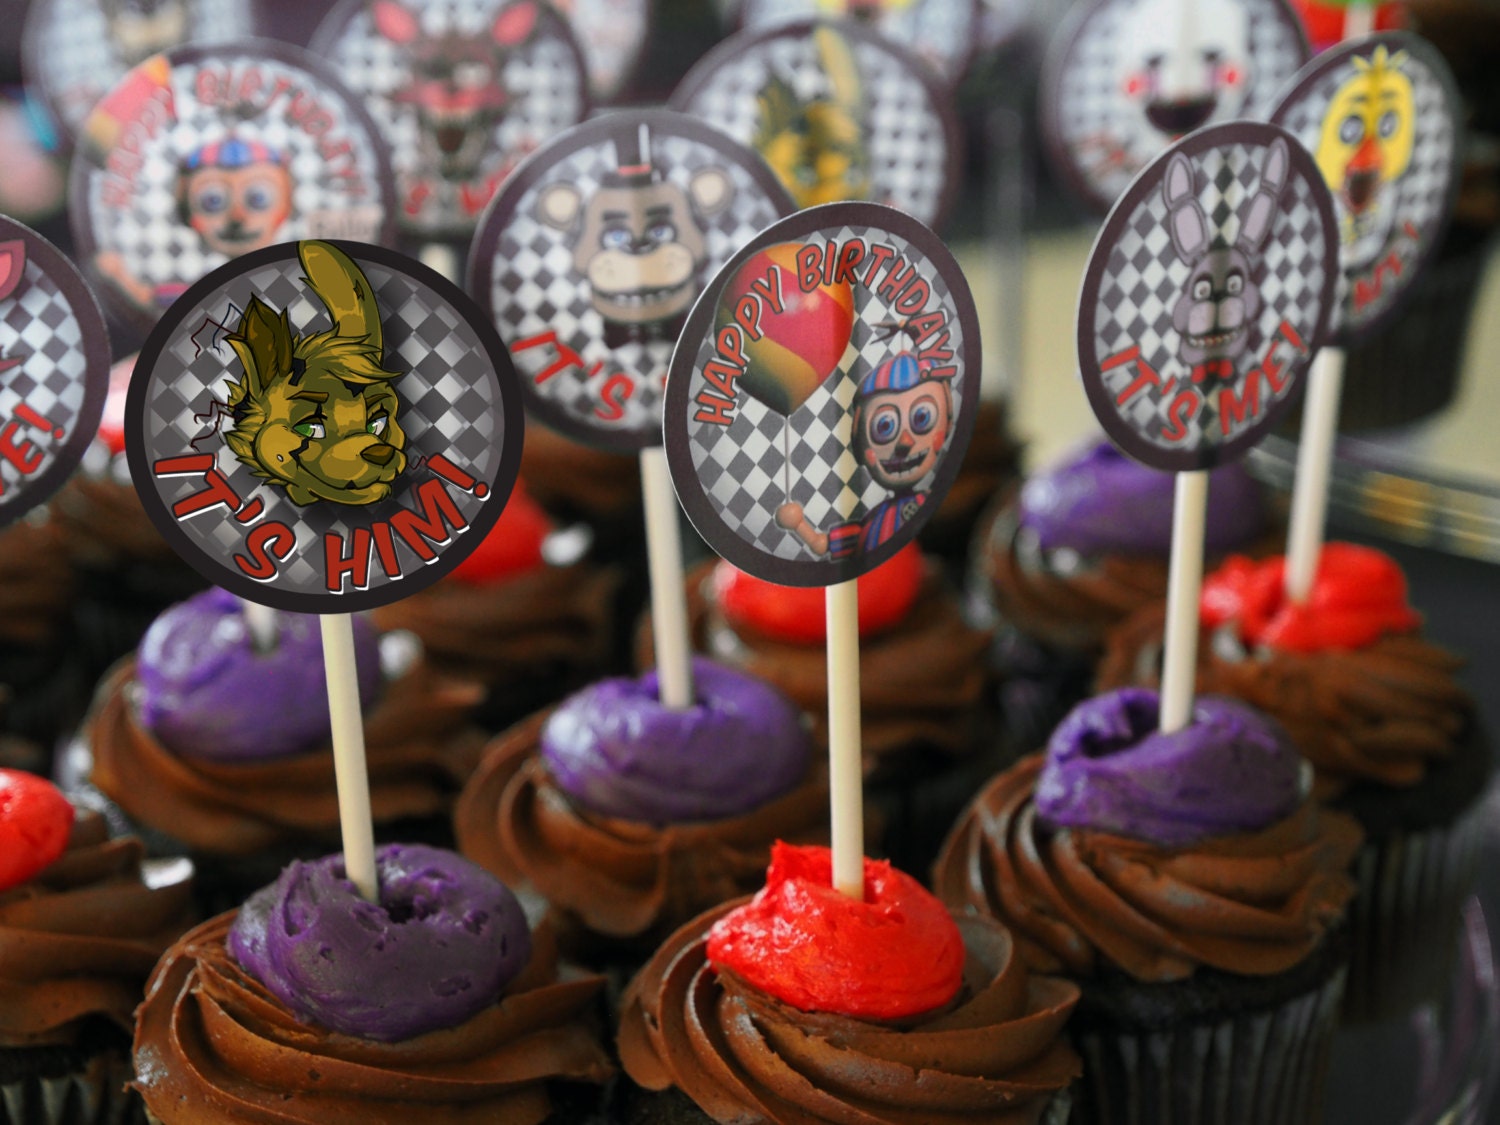 Five Nights at Freddies Cupcake Toppers Party Favors from Blue Fox Baking